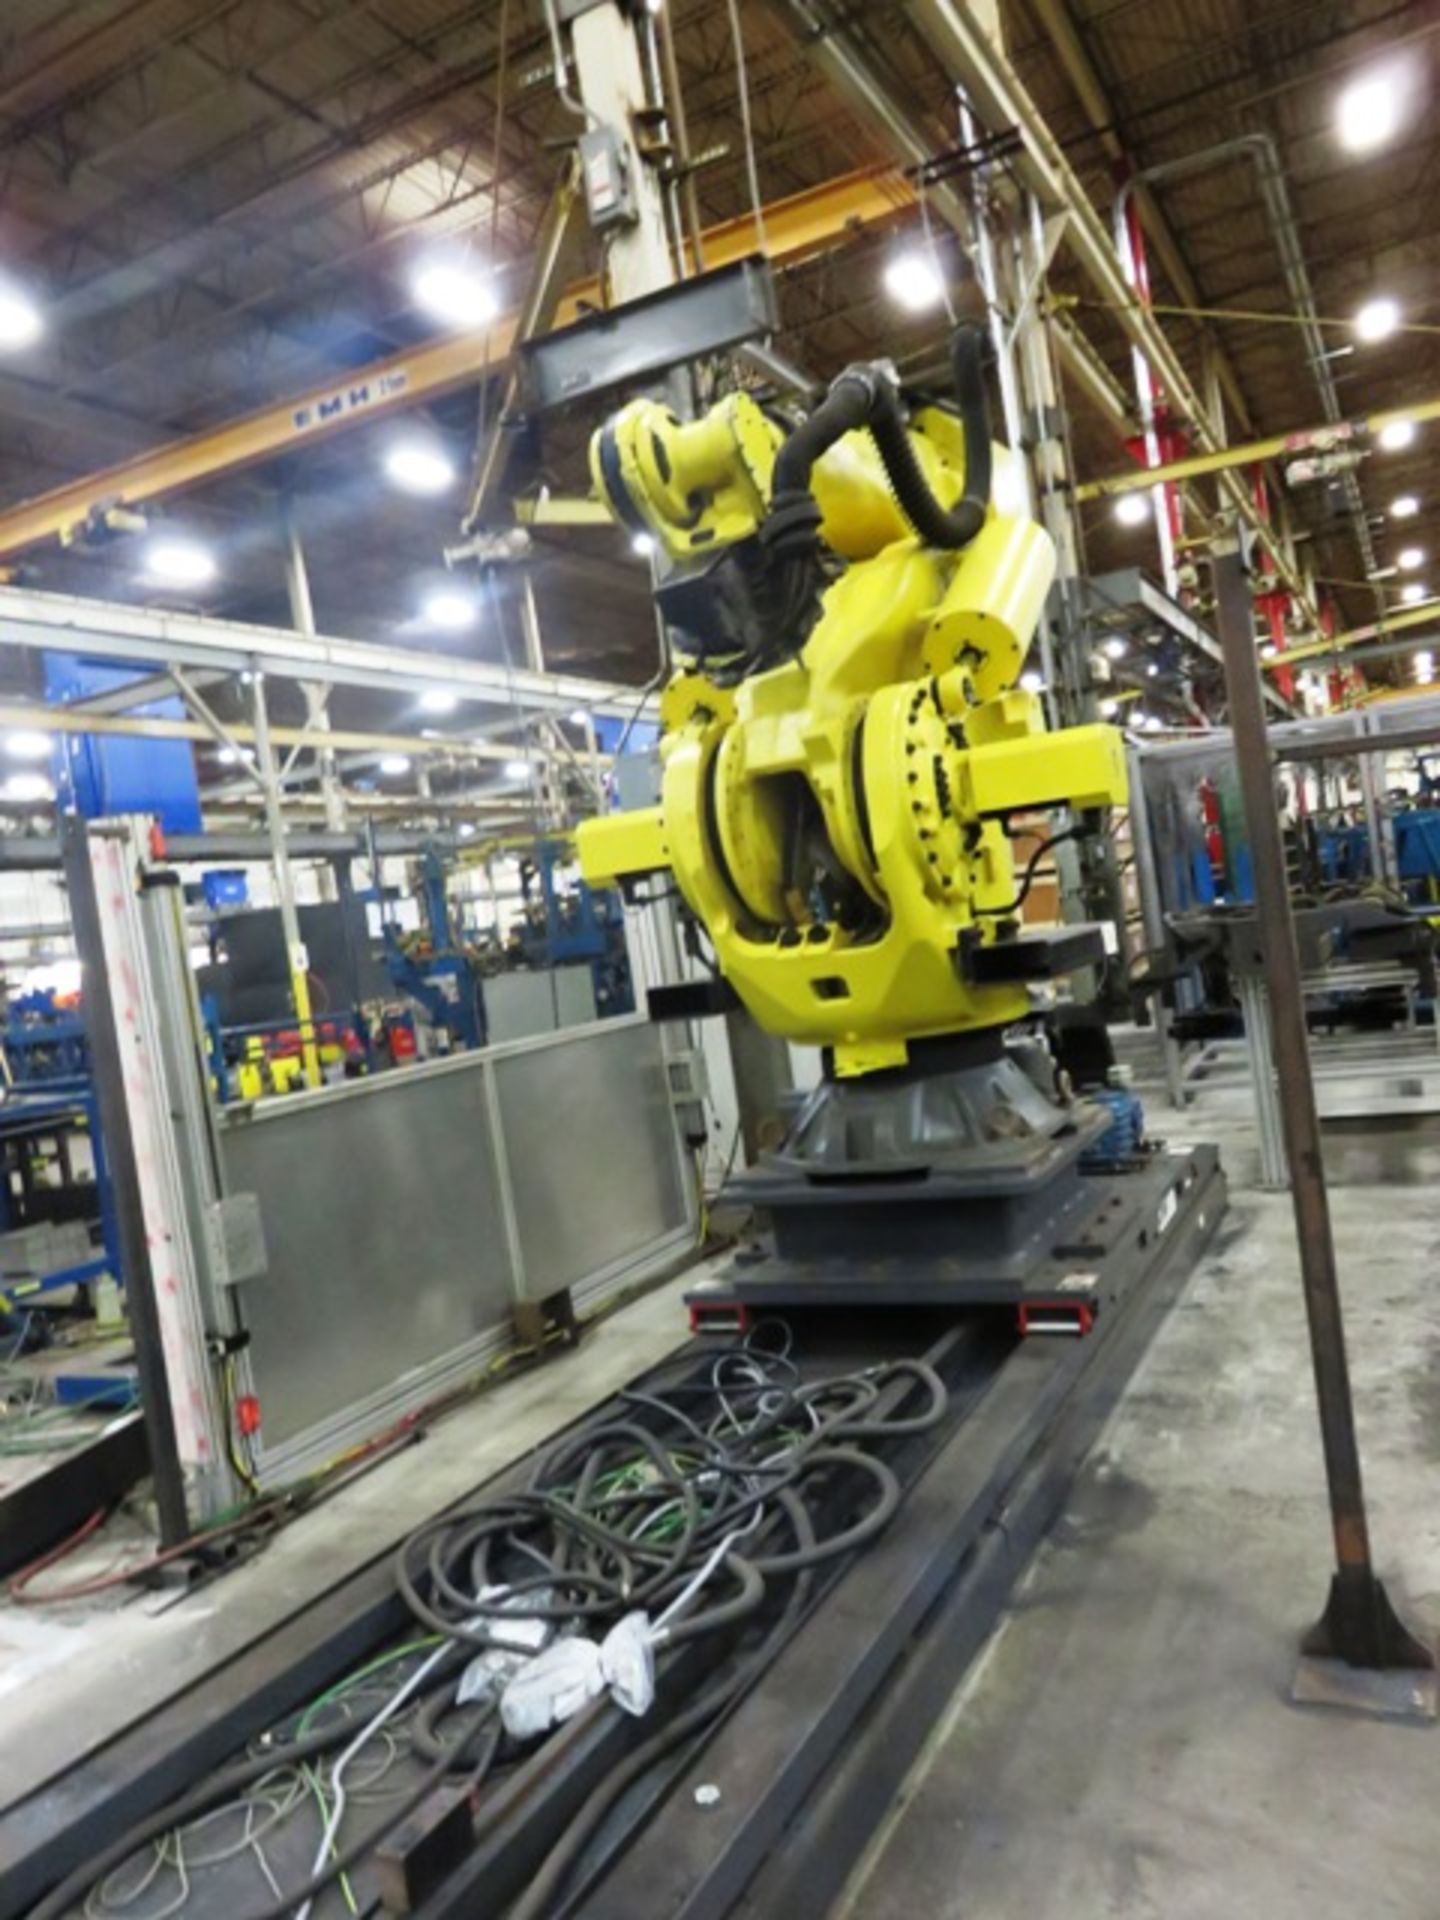 Fanuc Model M-900iB/700 Heavy Payload Material Handling Robot with Fanuc iR2D Infrared Vision Type - Image 3 of 6